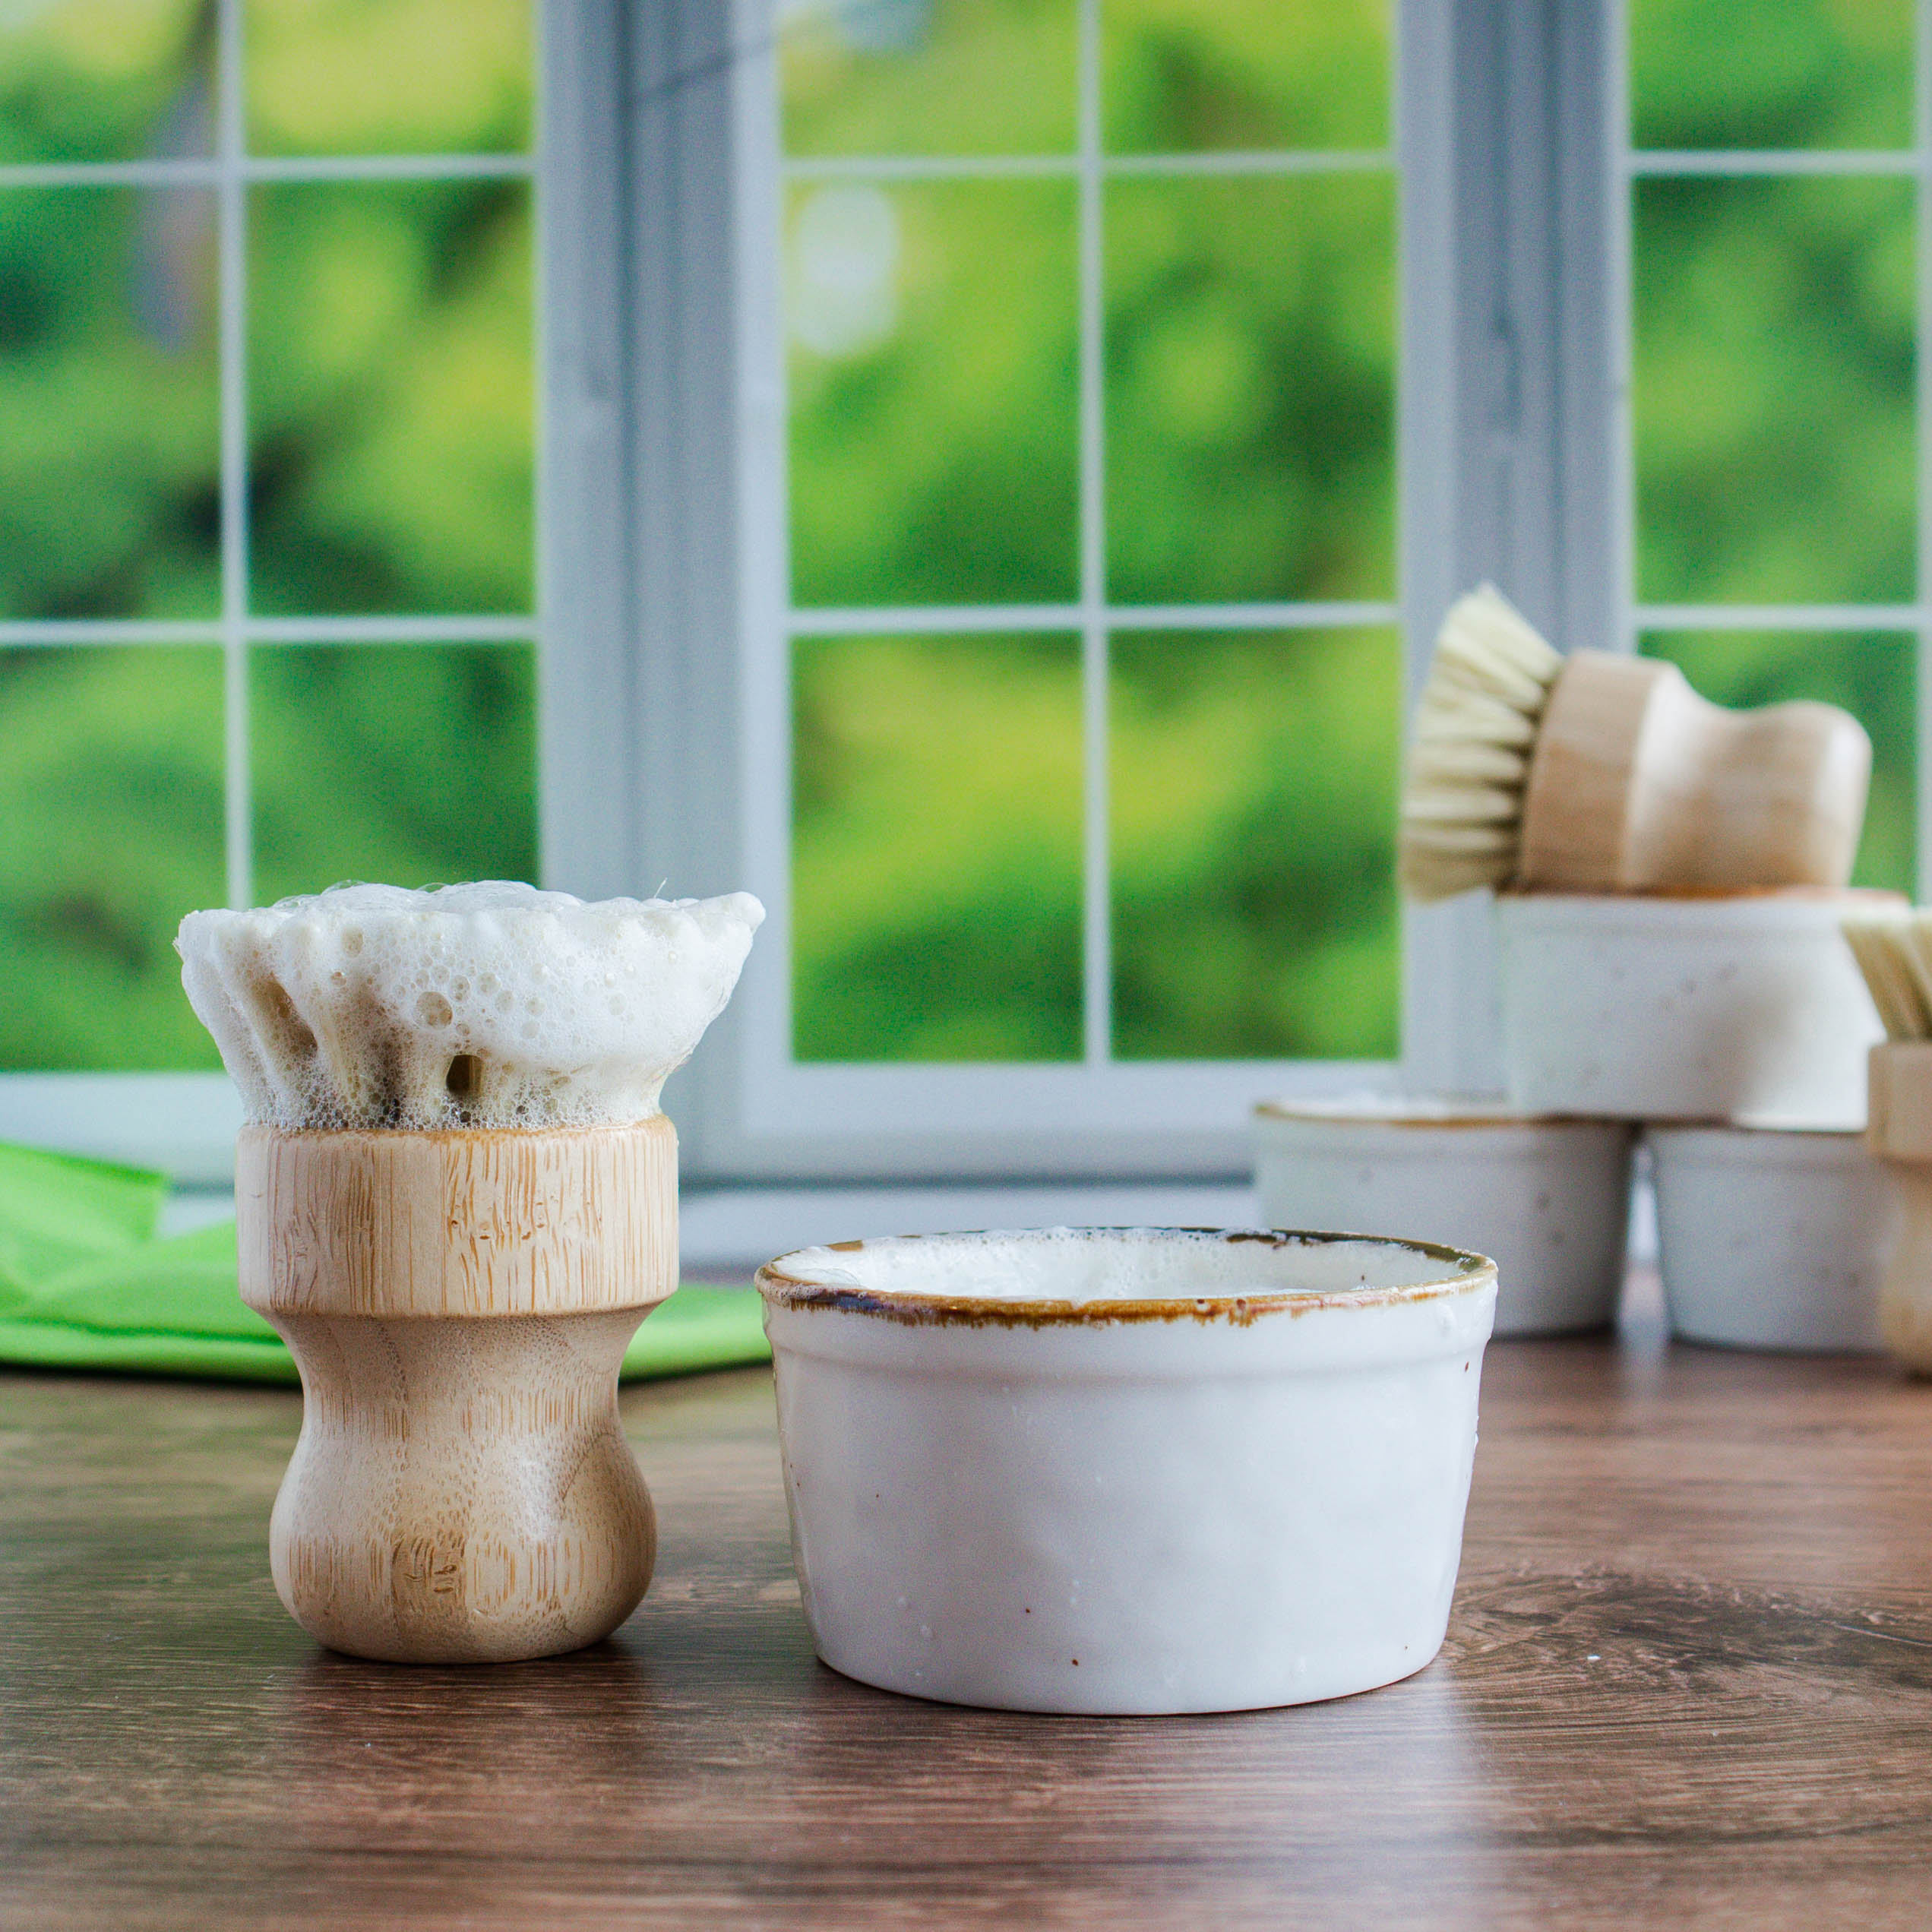 there is a bamboo dish brush full of lather standing next to a crock. in the background on the right is a trio of crocks stacked with one bamboo brush laying across the top and another standing next to them. there is a window in the background showing a blurring of green leaves.